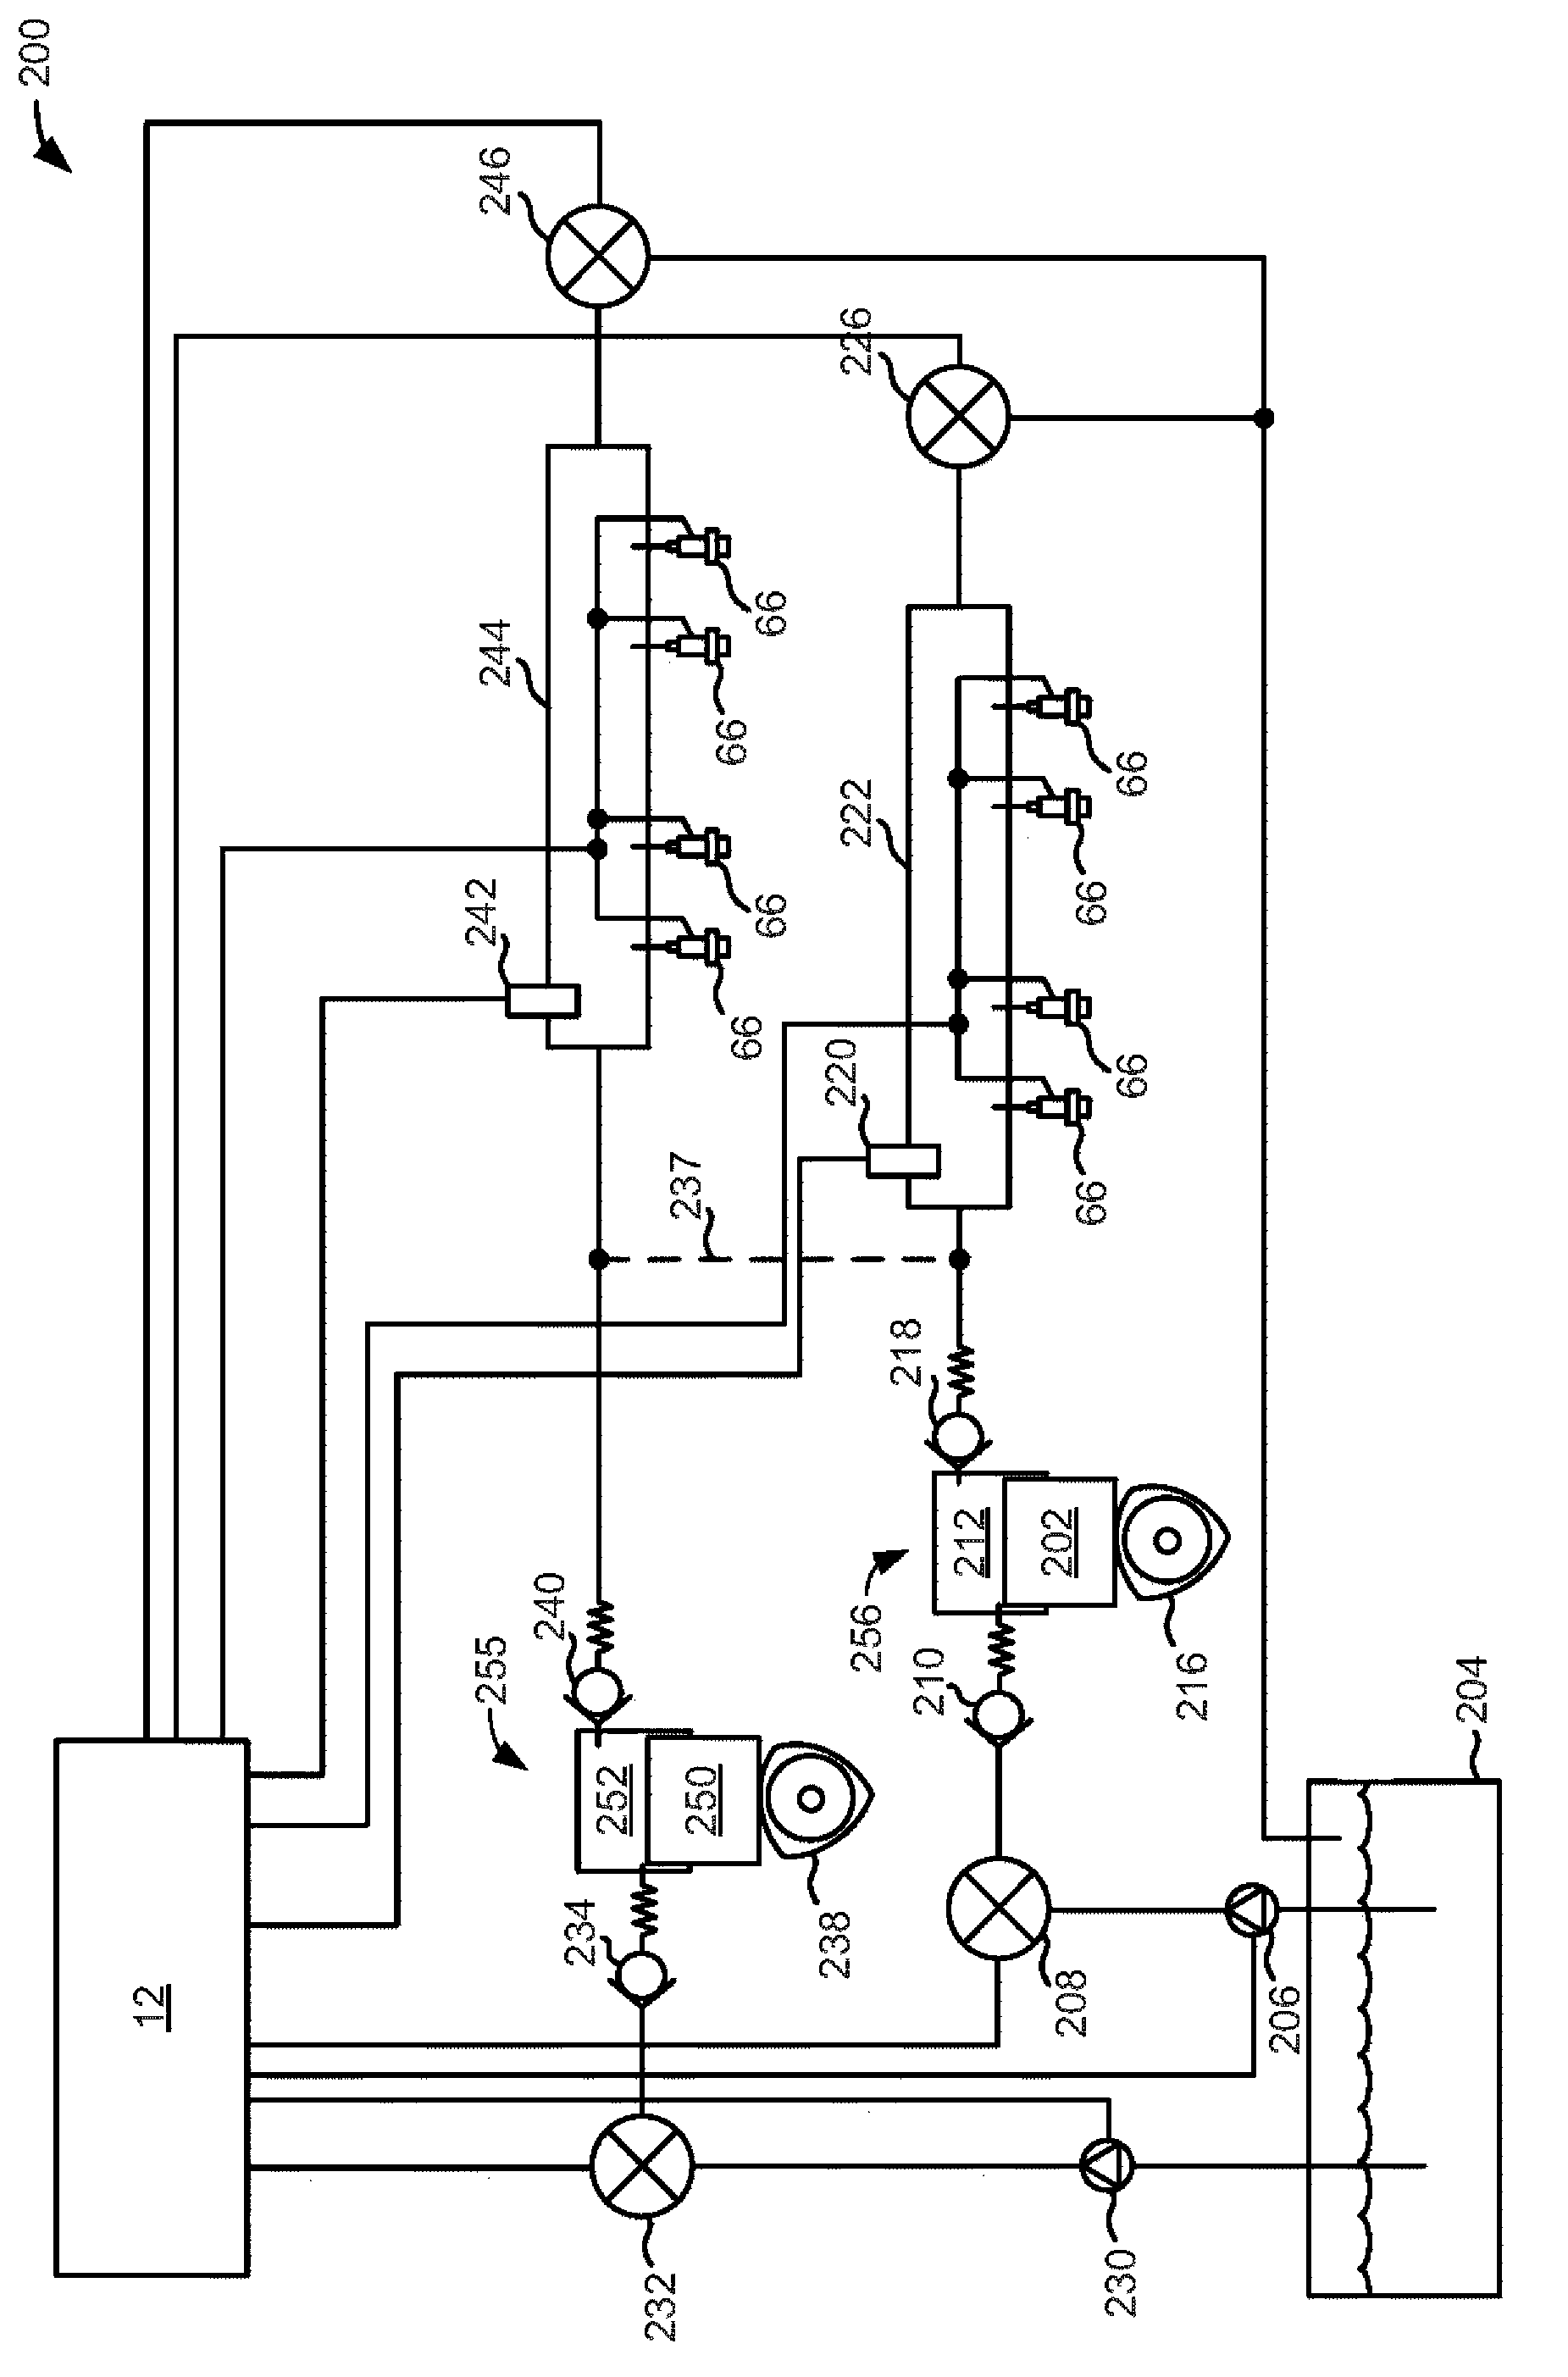 System and method for injecting fuel